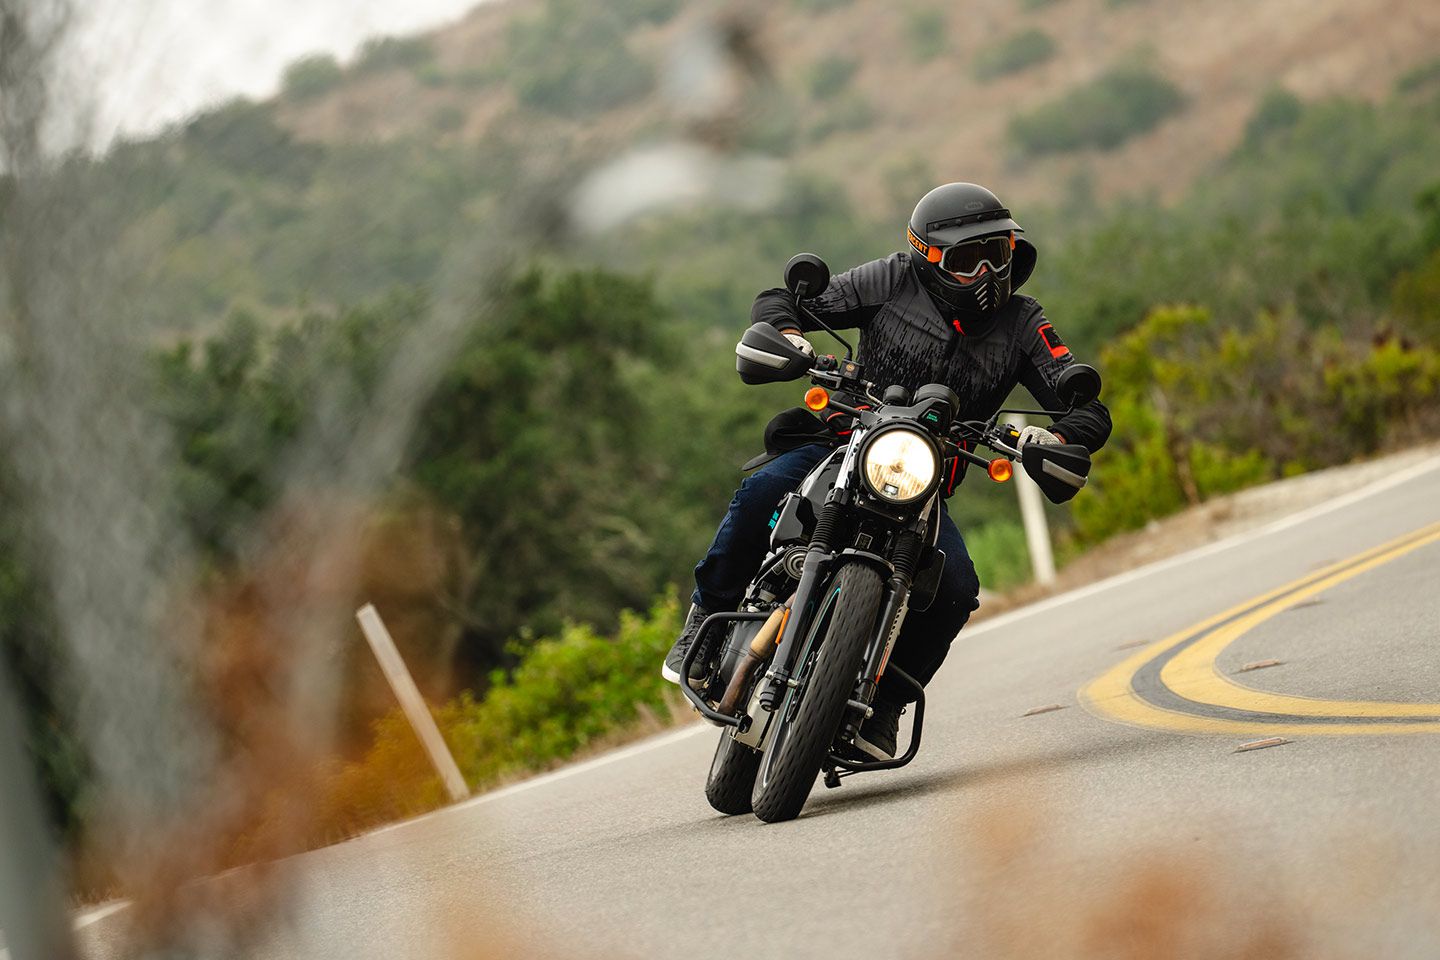 The Scram 411 offers strong road handling for an entry-level air-cooled bike.